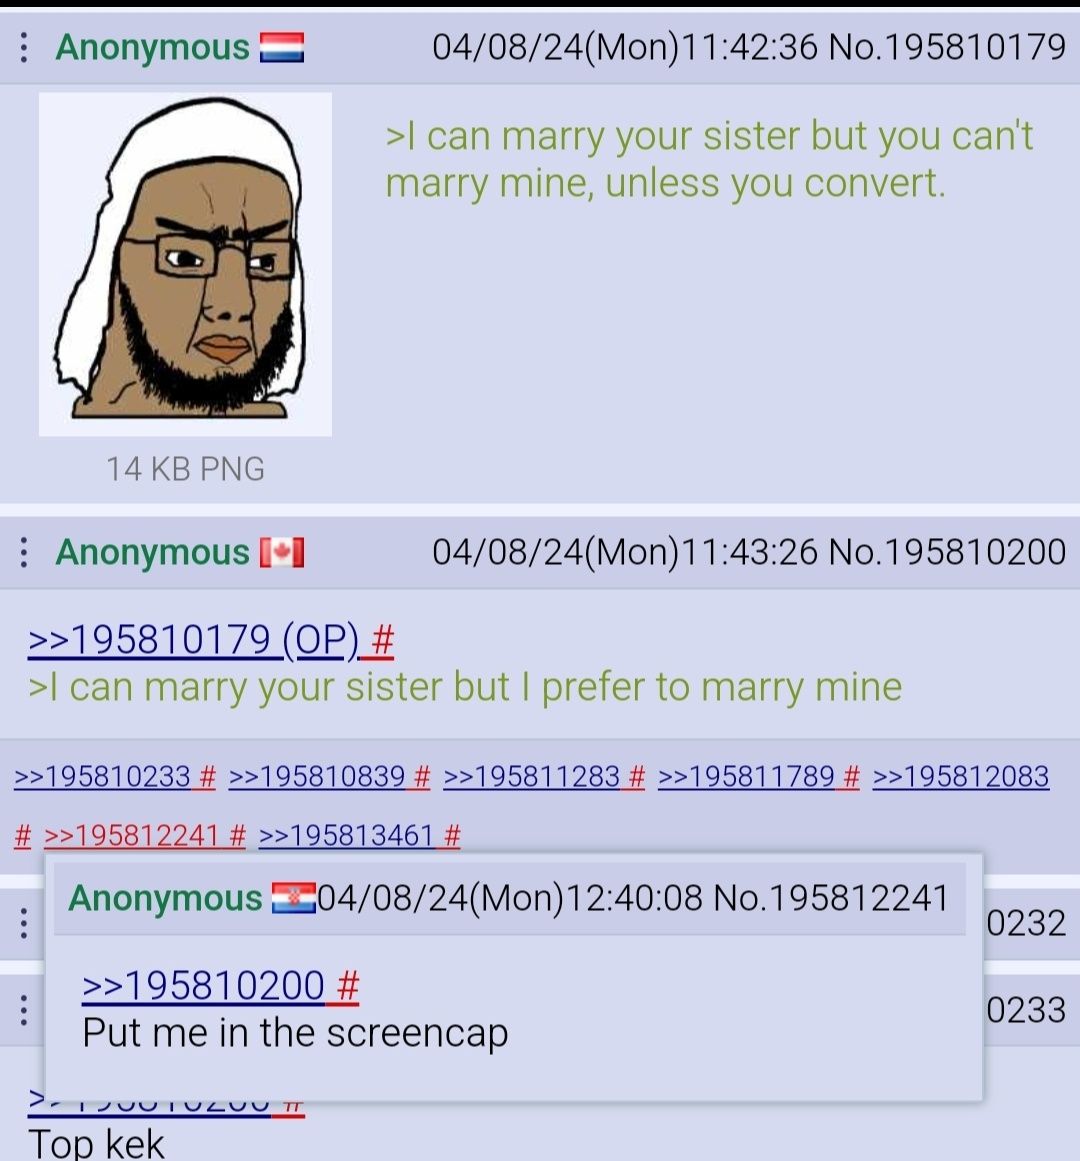 anon gets in the screencap